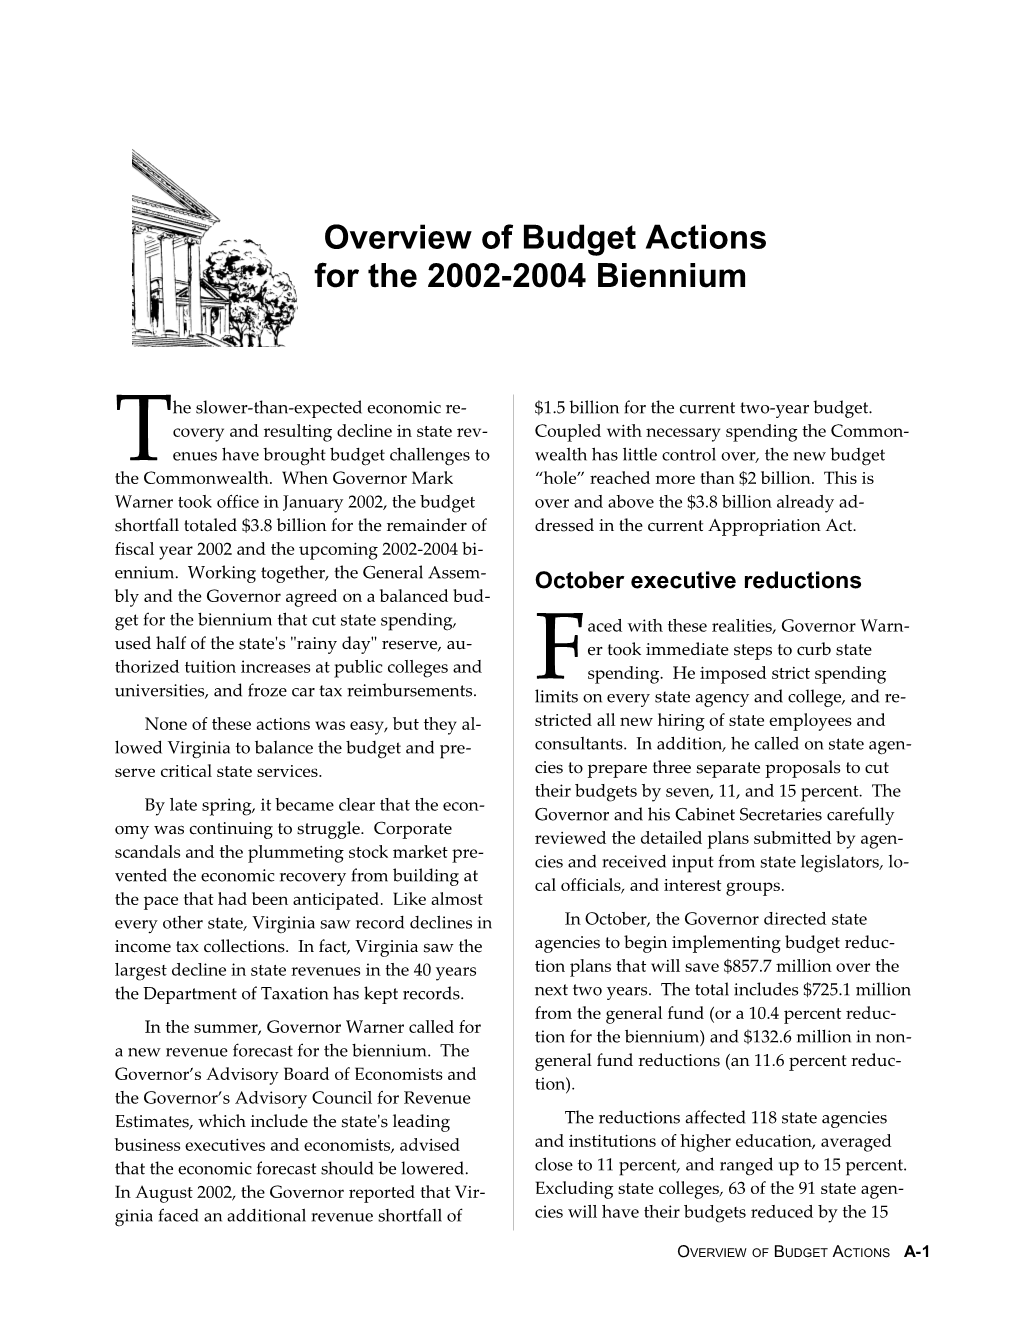 Overview of Budget Actions for the 2002-2004 Biennium